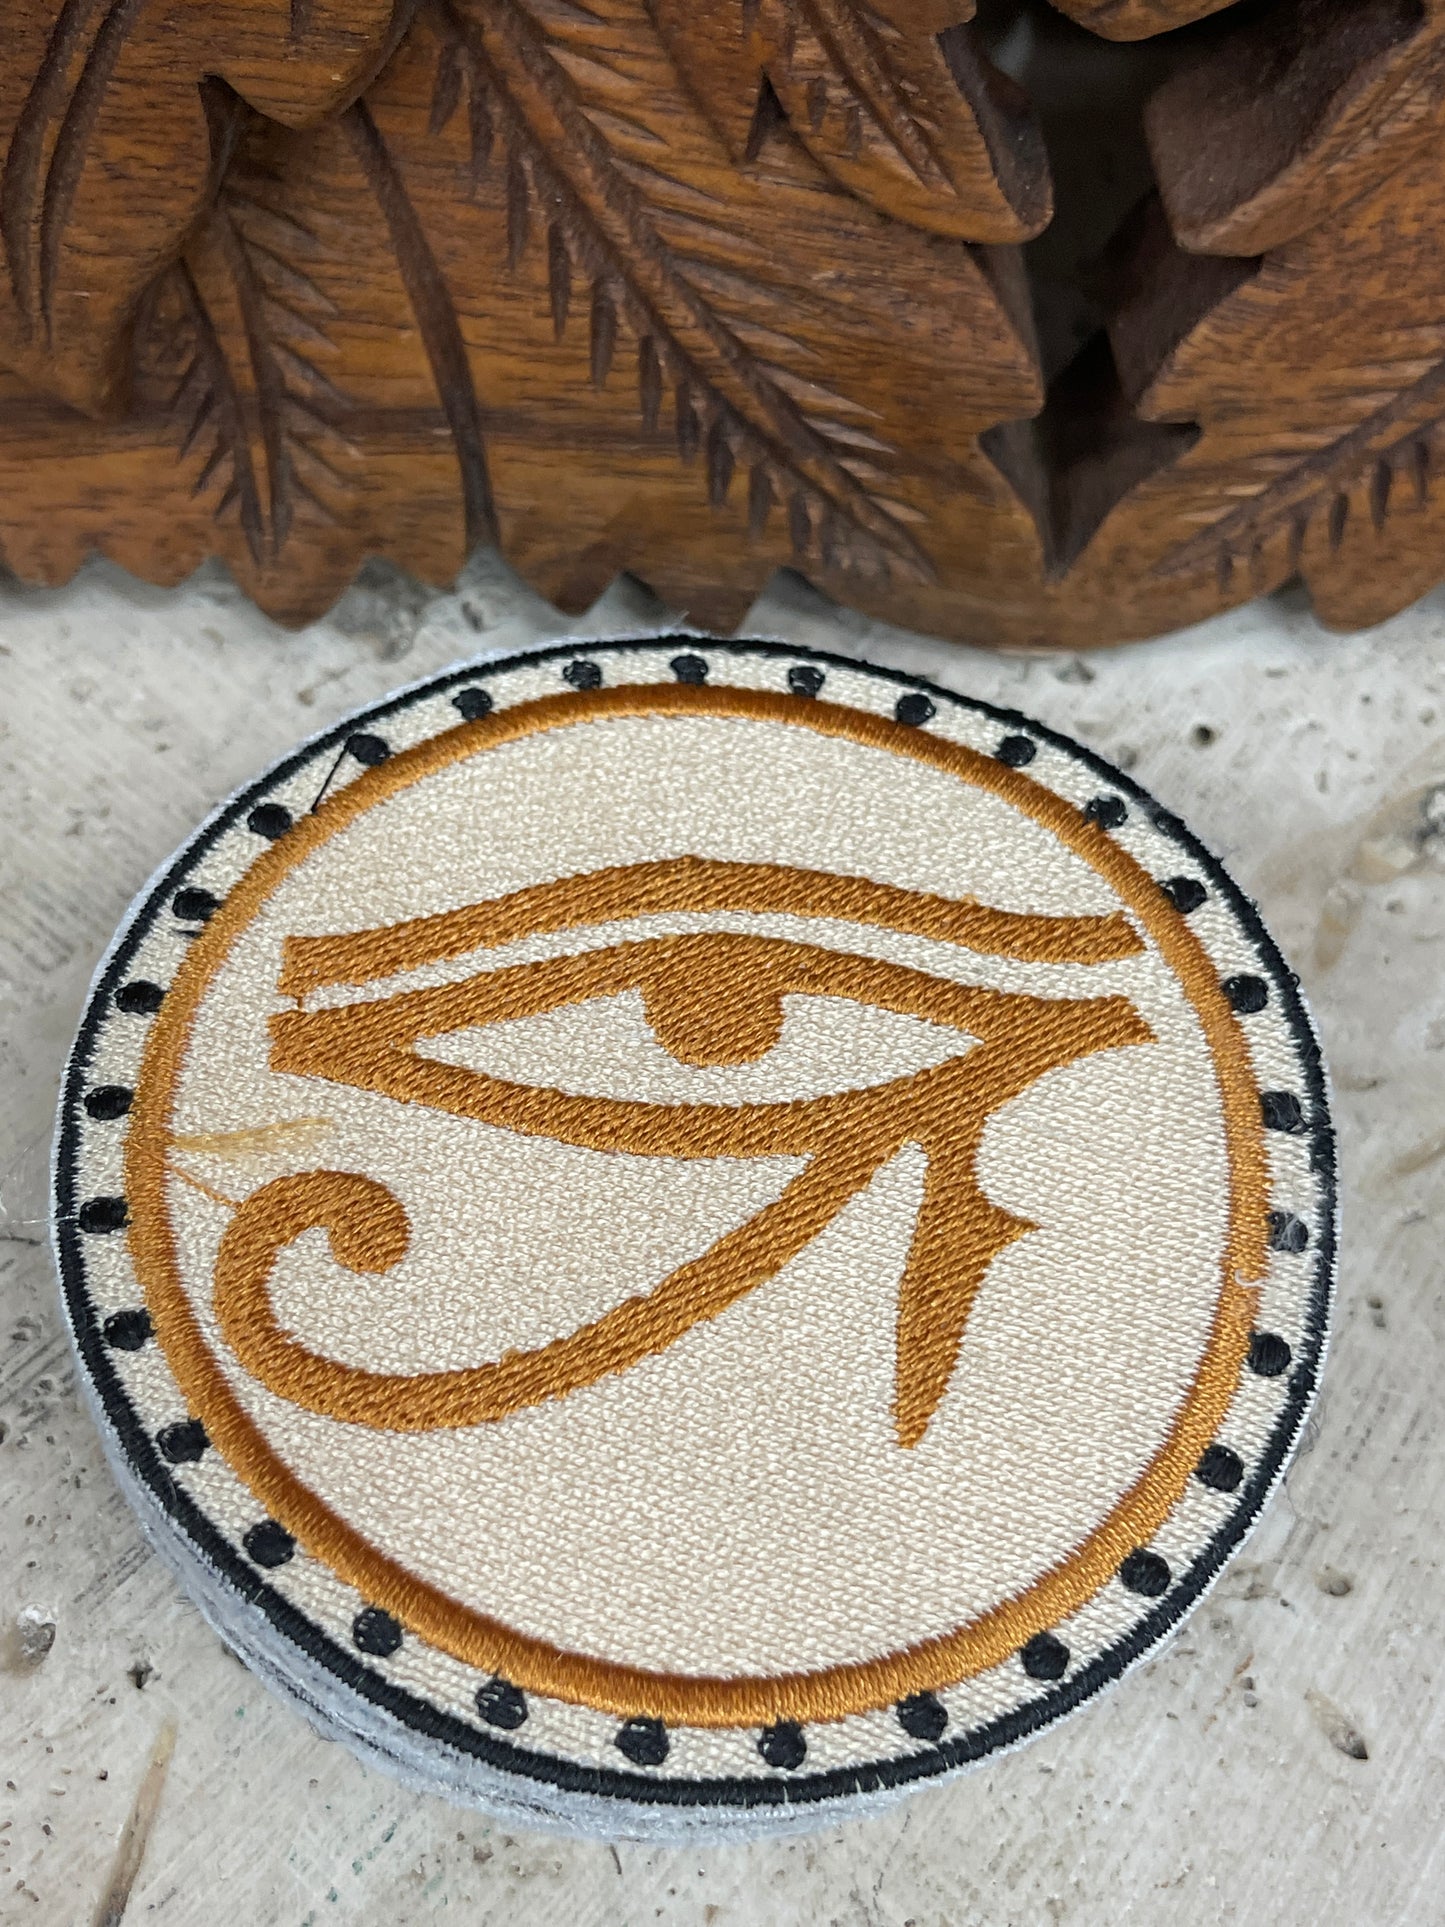 Eye of Horus Patches